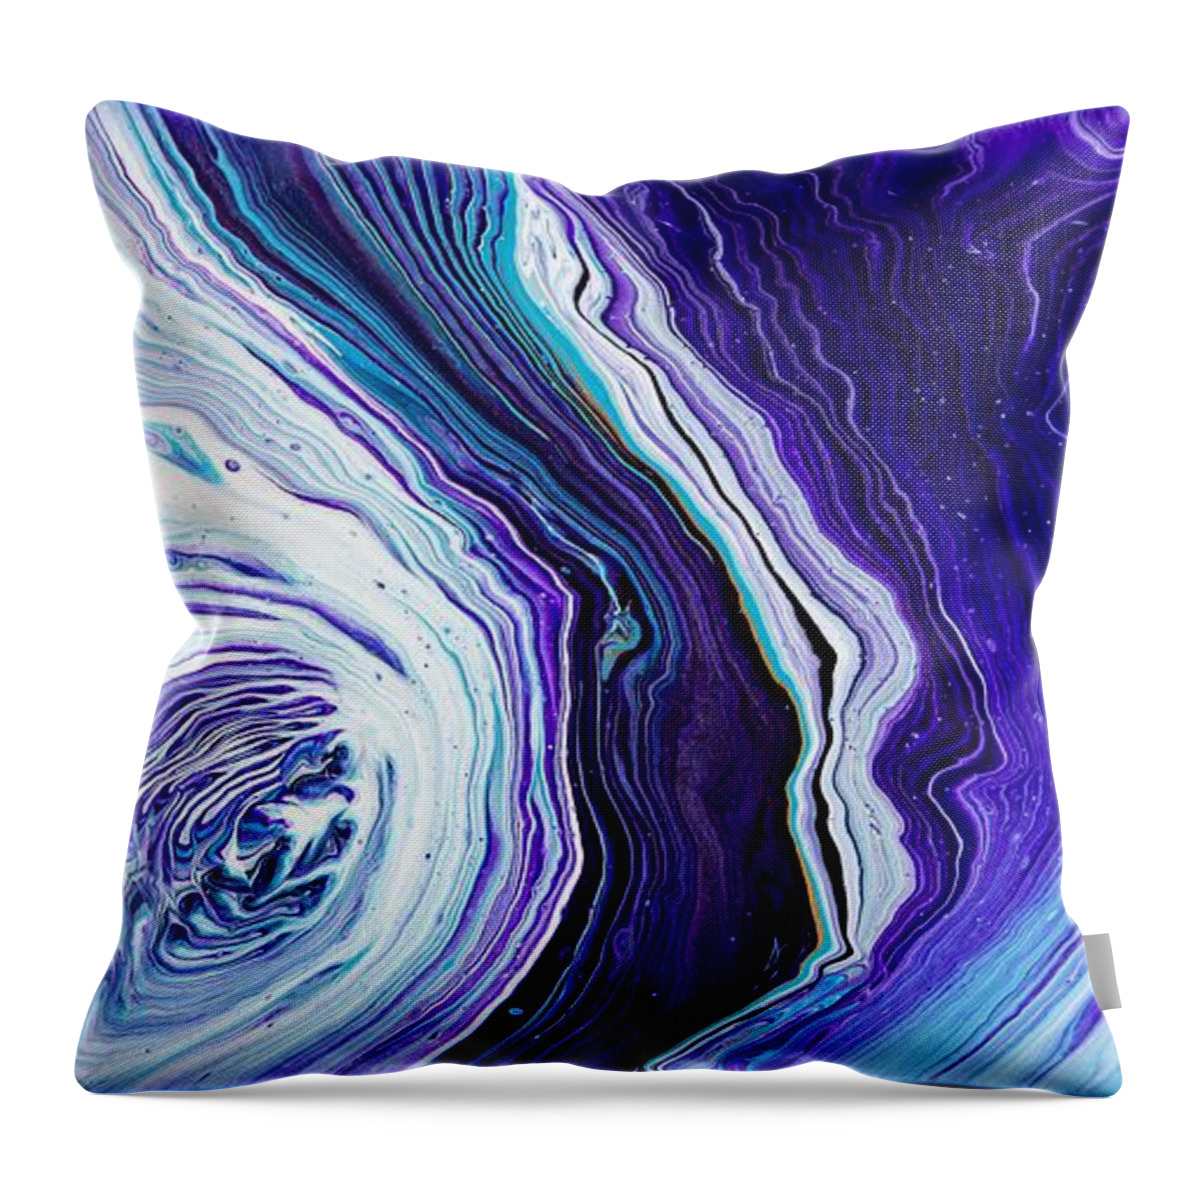 Abstract Throw Pillow featuring the digital art Here And There - Colorful Abstract Contemporary Acrylic Painting by Sambel Pedes